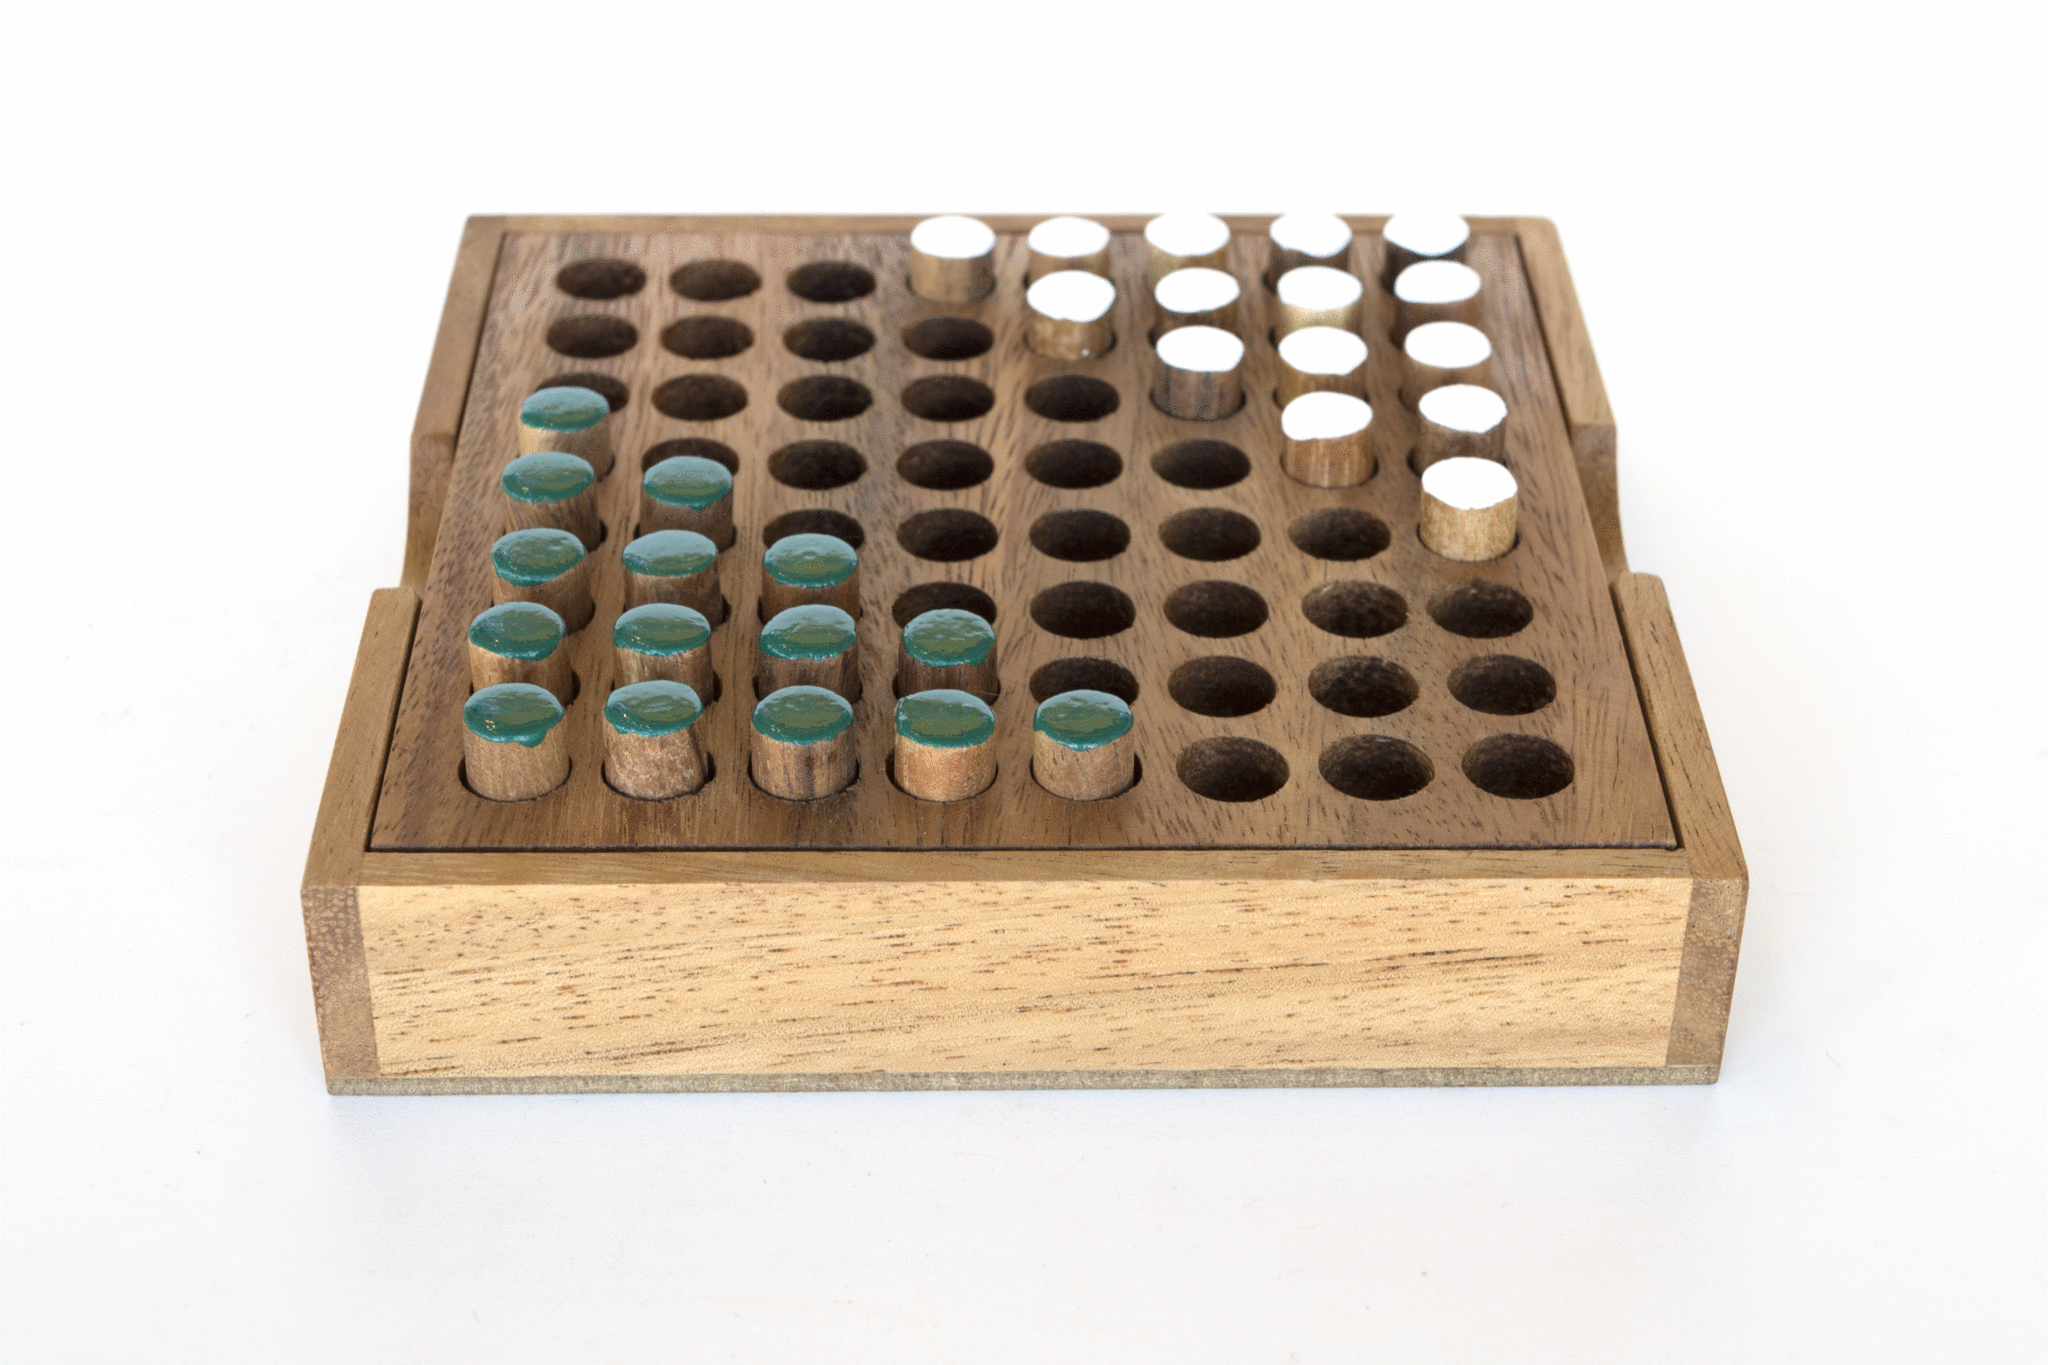 chinese checkers 2 player